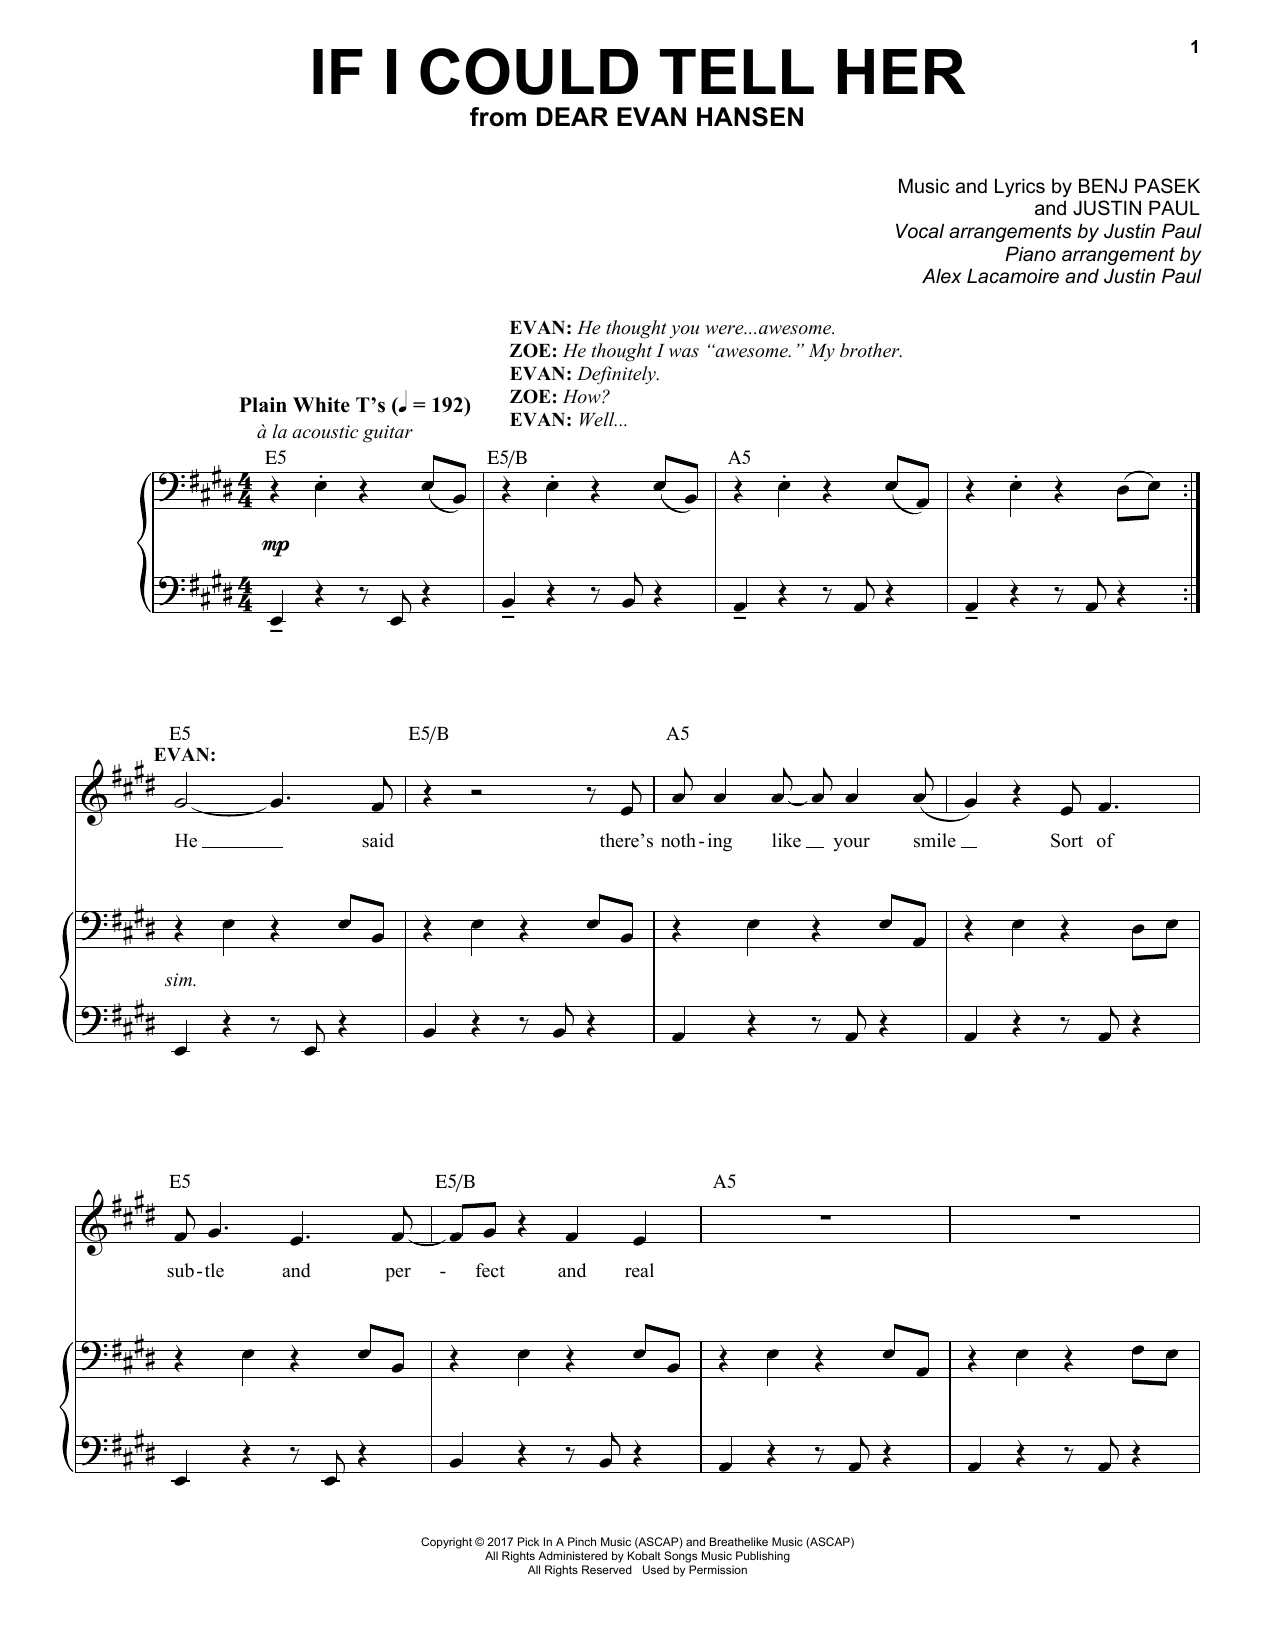 Pasek & Paul If I Could Tell Her (from Dear Evan Hansen) sheet music notes printable PDF score